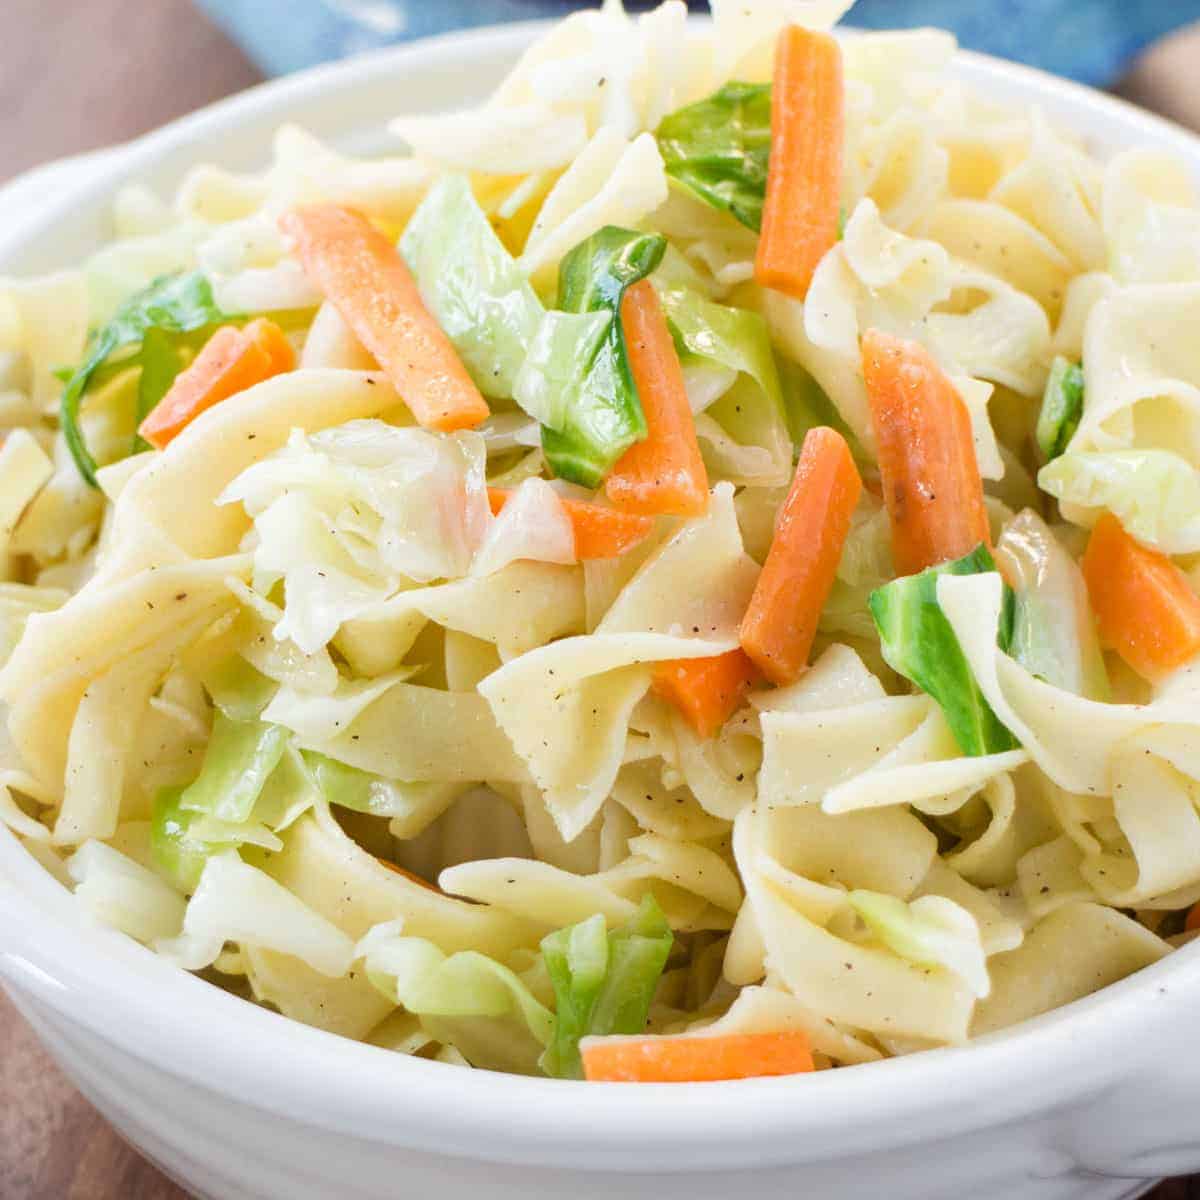 A straight view of cabbage and noodles in a white and blue bowl.